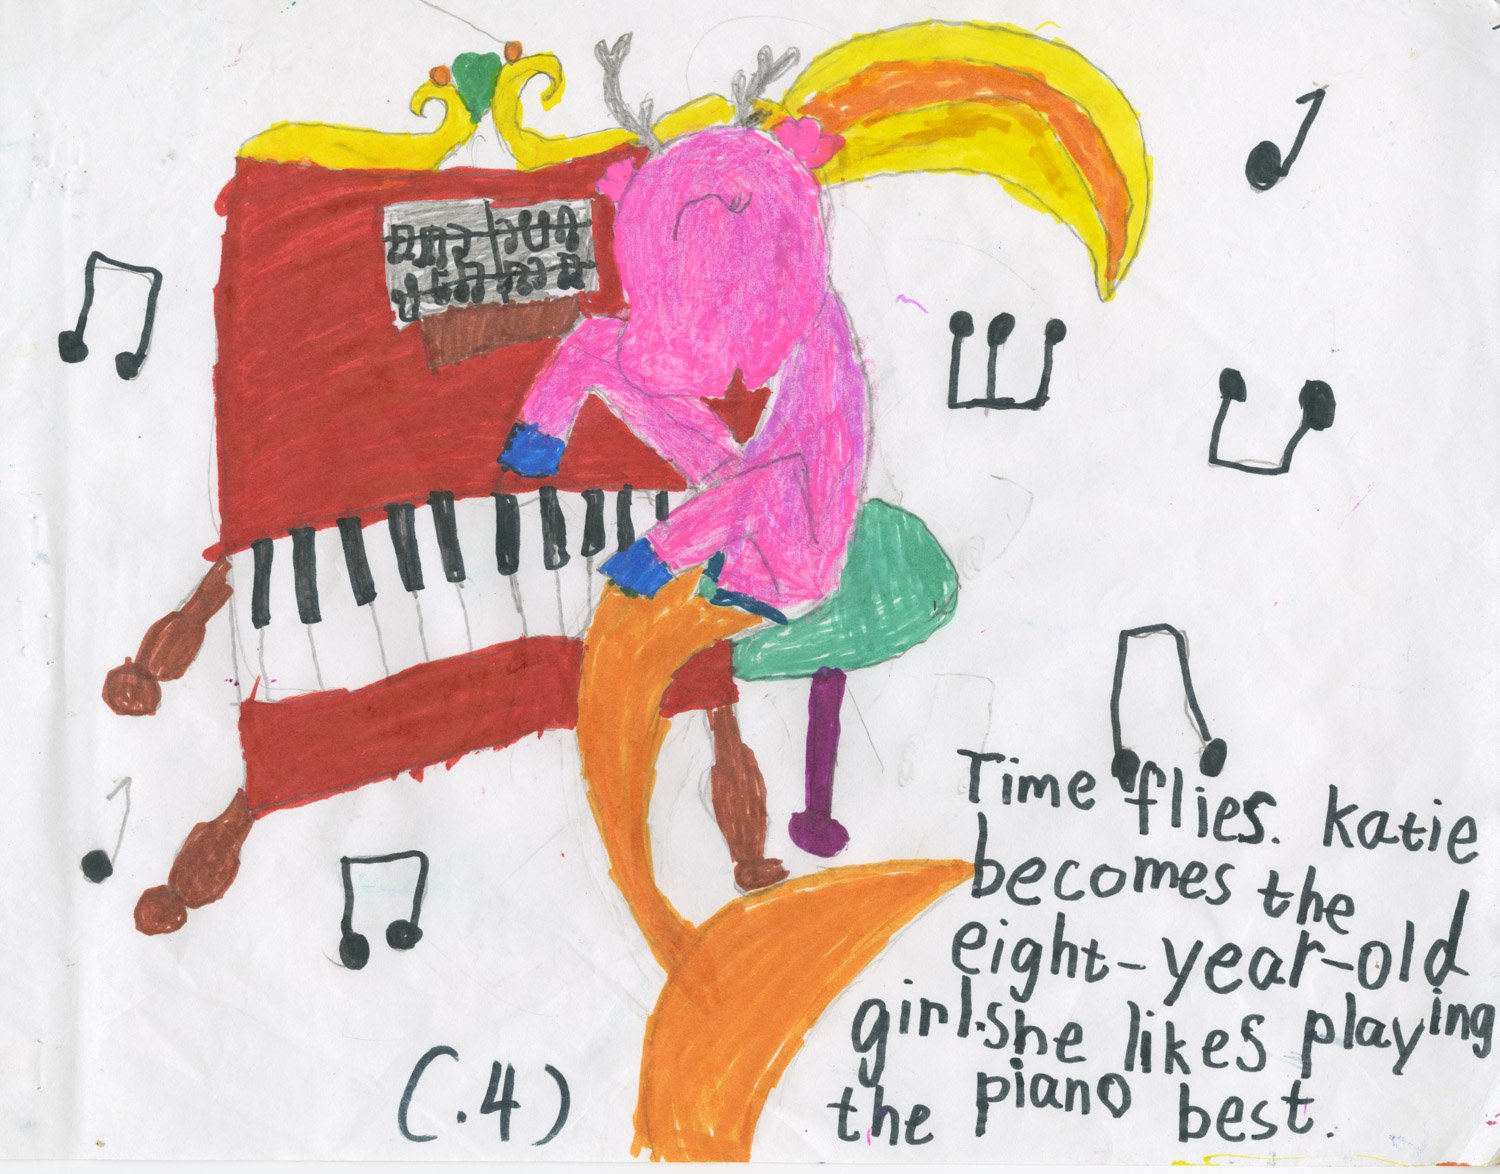 Time flies. Katie becomes an eight-year old girl.  She likes playing the piano best.